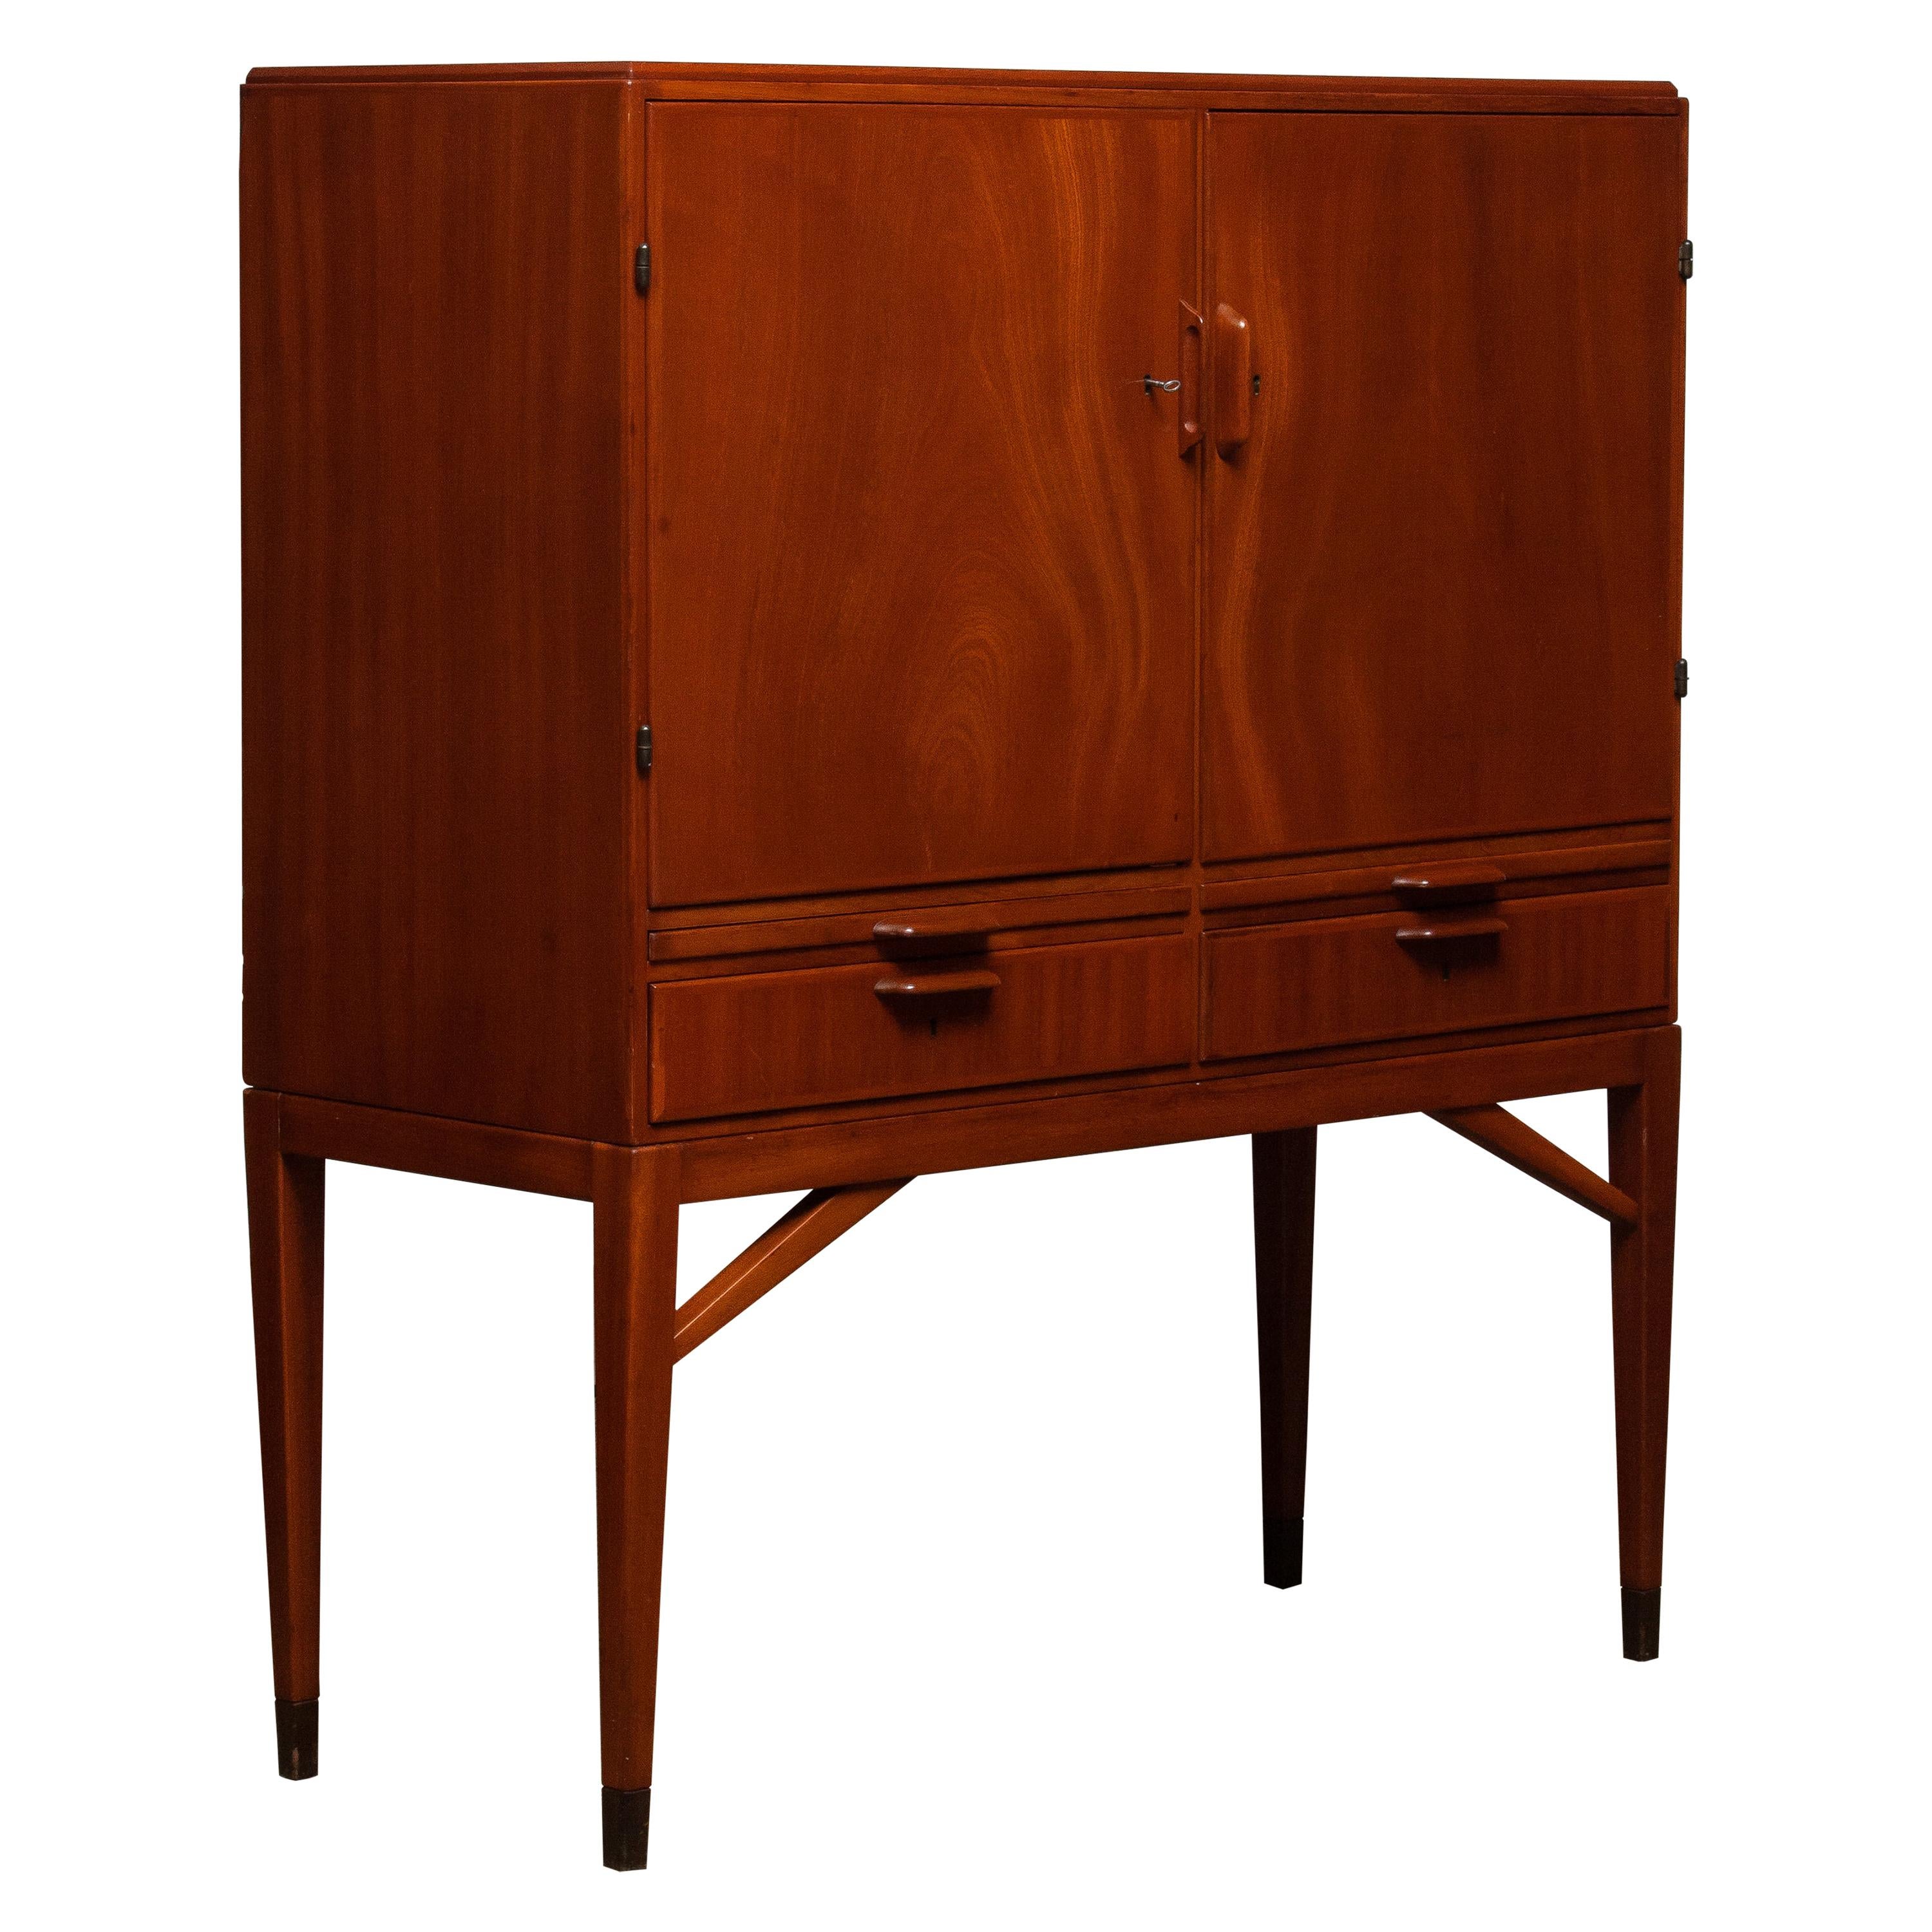 1950s, High Quality Mahogany Dry Bar / Cabinet Made by Marbo Sweden, SMI Labeled